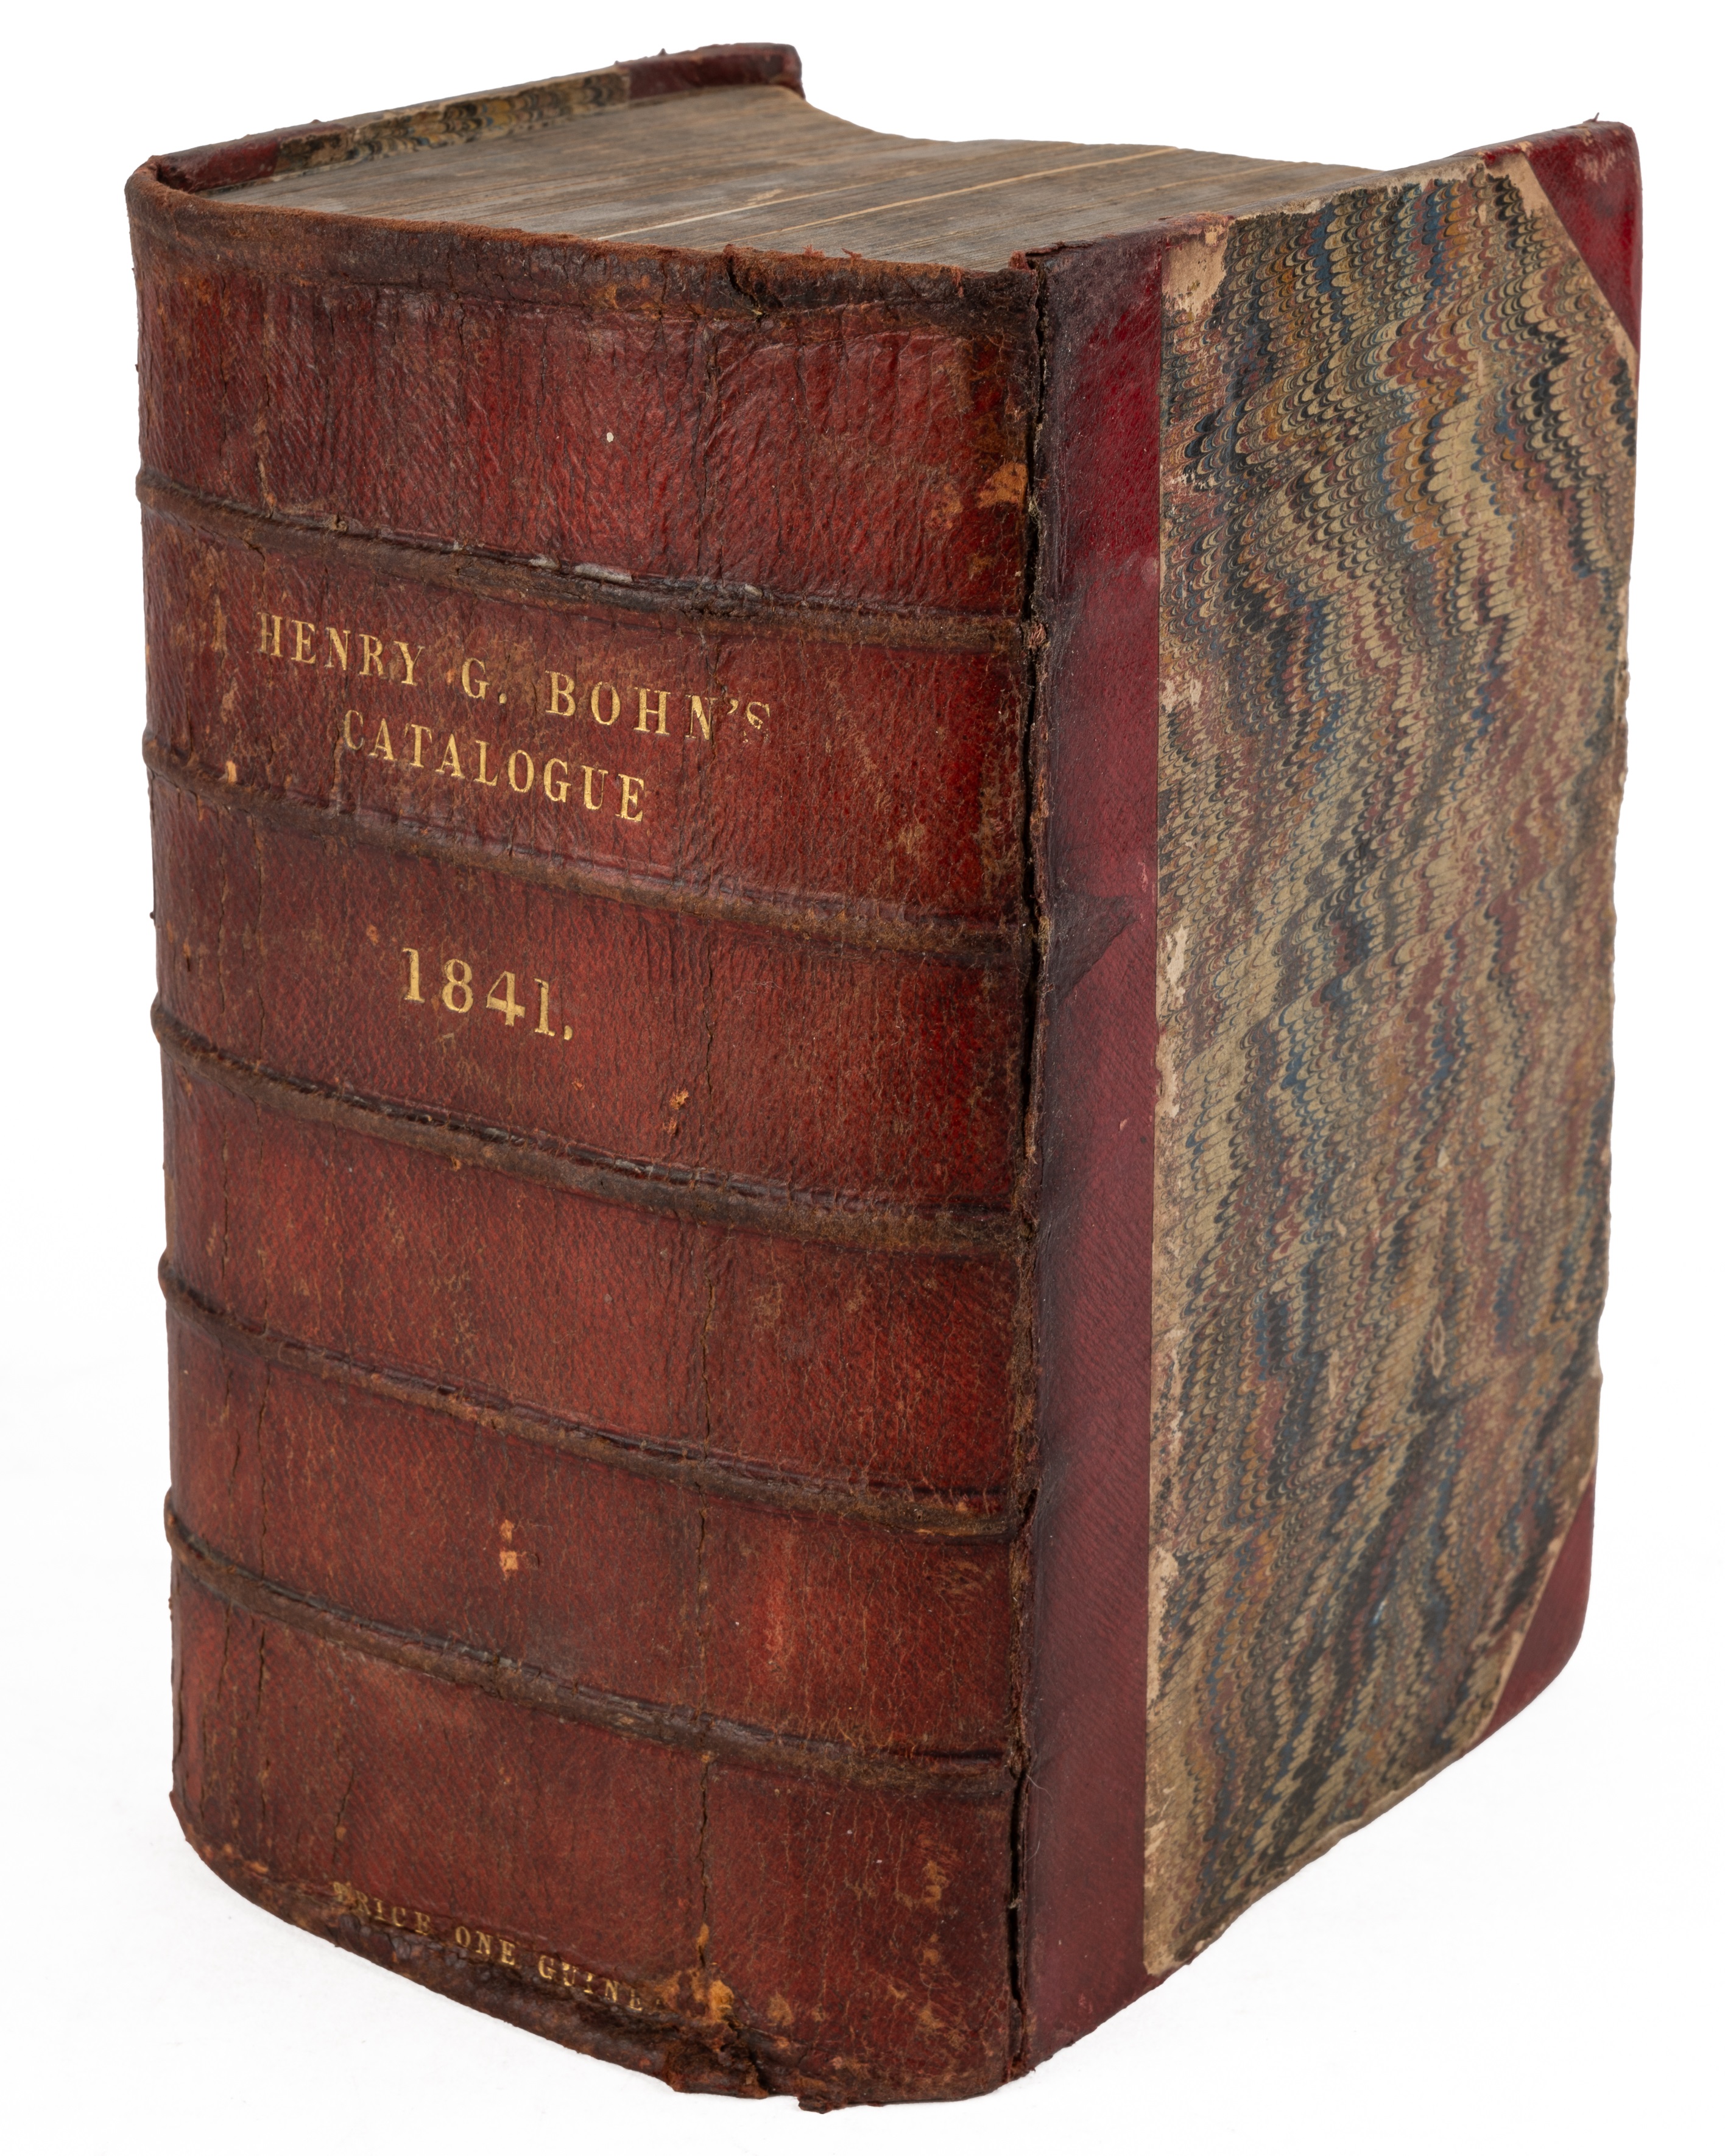 Bohn (Henry C). York St, Covent Garden, London. 'A Catalogue of Books' 1841 with engraved title